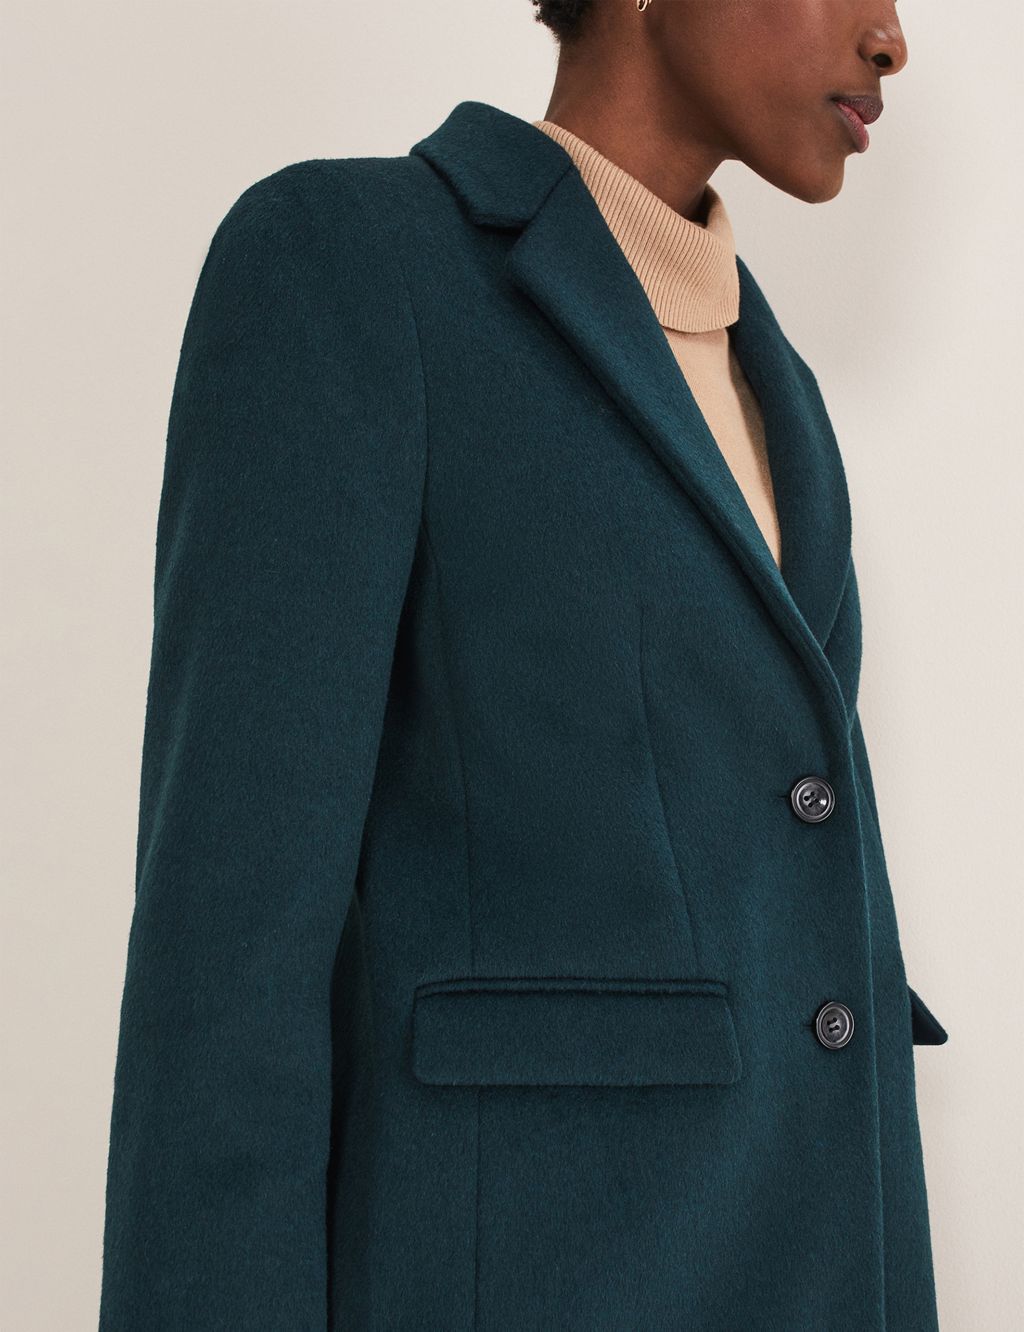 Wool Blend Collared Tailored Coat image 6